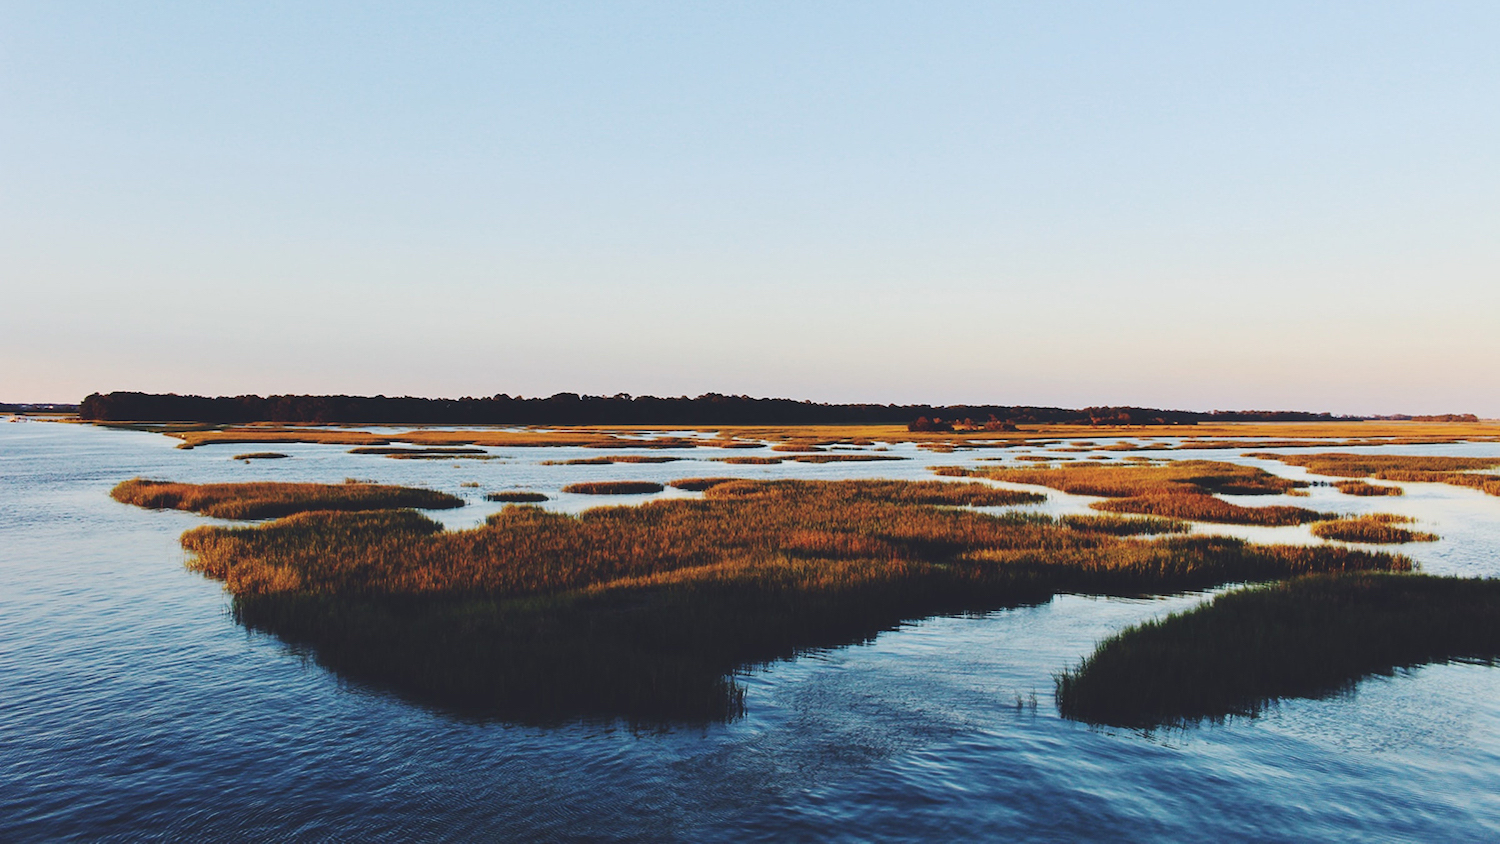 Sunset over marsh - Ocean Advocacy Workshop Prepares Students for Environmental Leadership - College of Natural Resources News NC State University